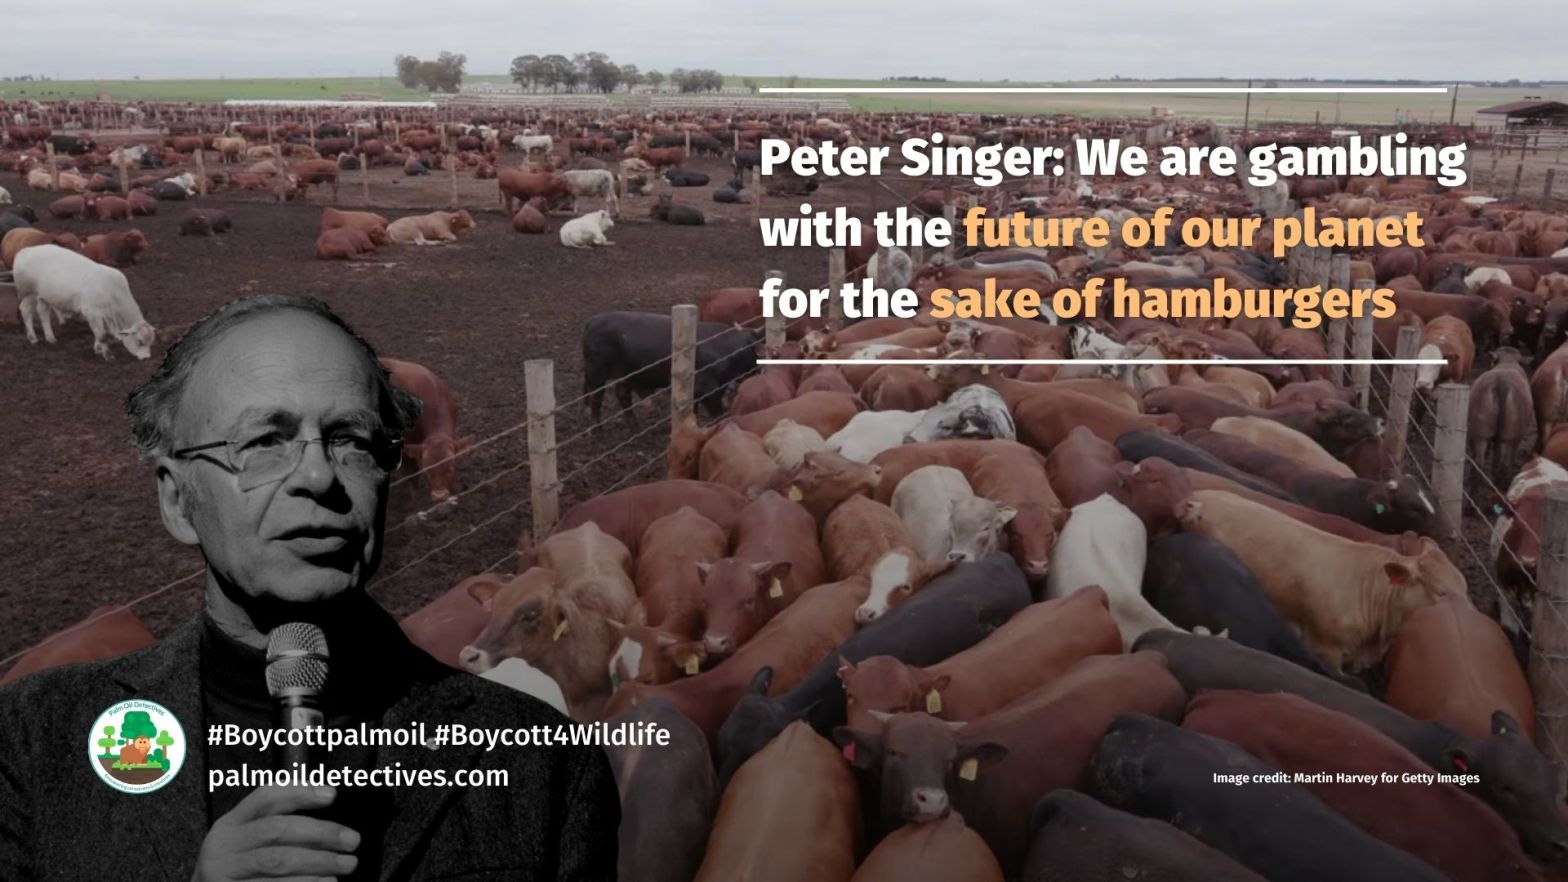 Singer - We are gambling with the future of our planet for hamburgers